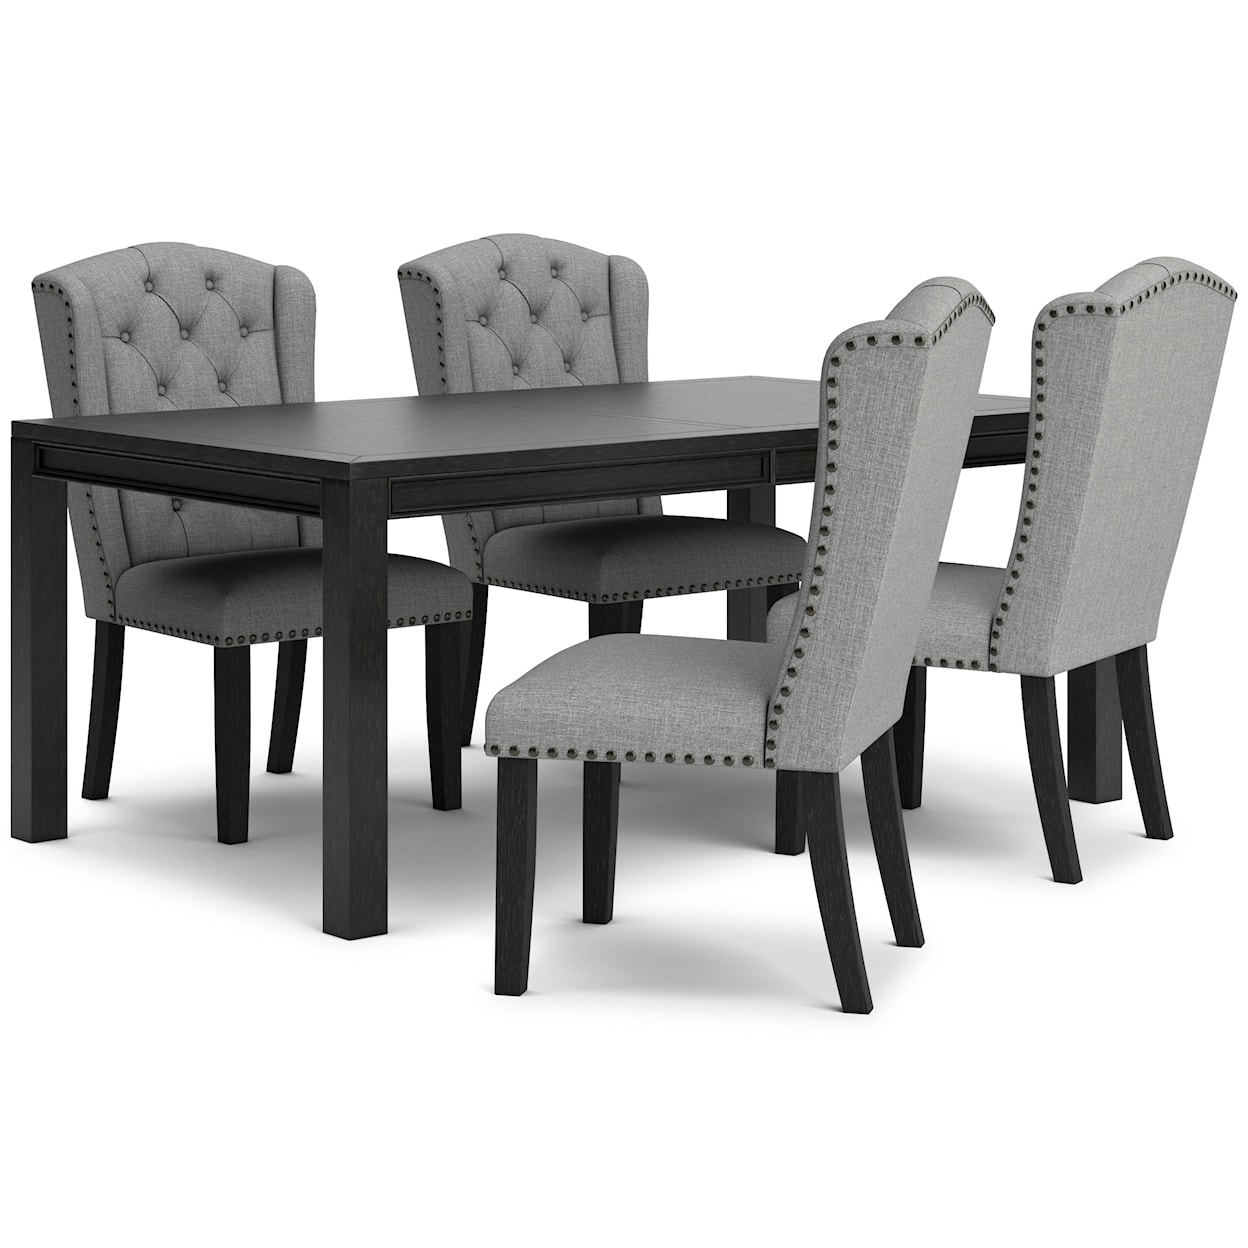 Signature Design by Ashley Jeanette 5-Piece Dining Set